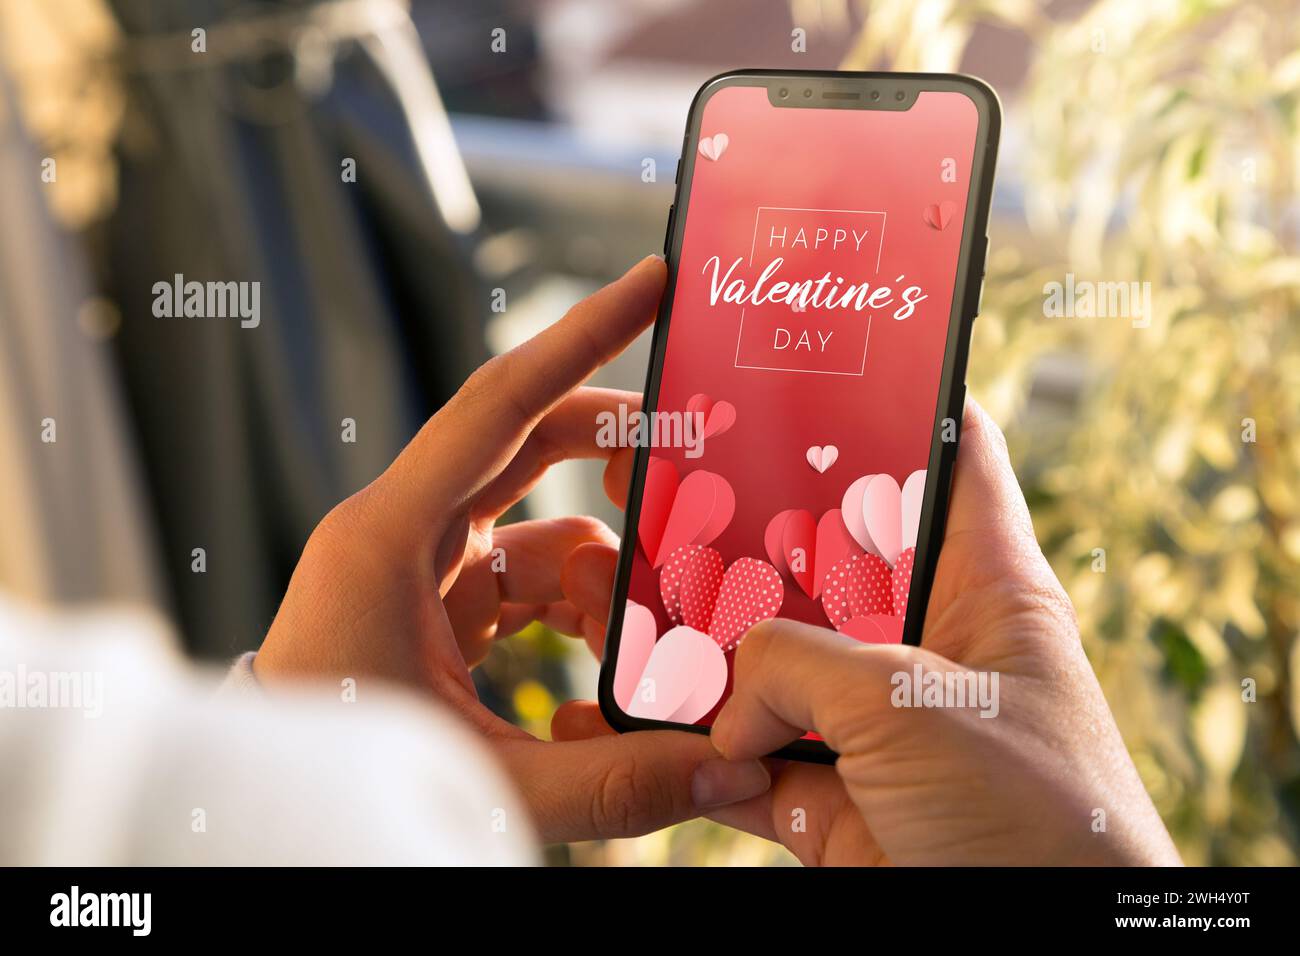 Woman showing a digital Valentine's Day greeting card in the mobile phone screen. Stock Photo